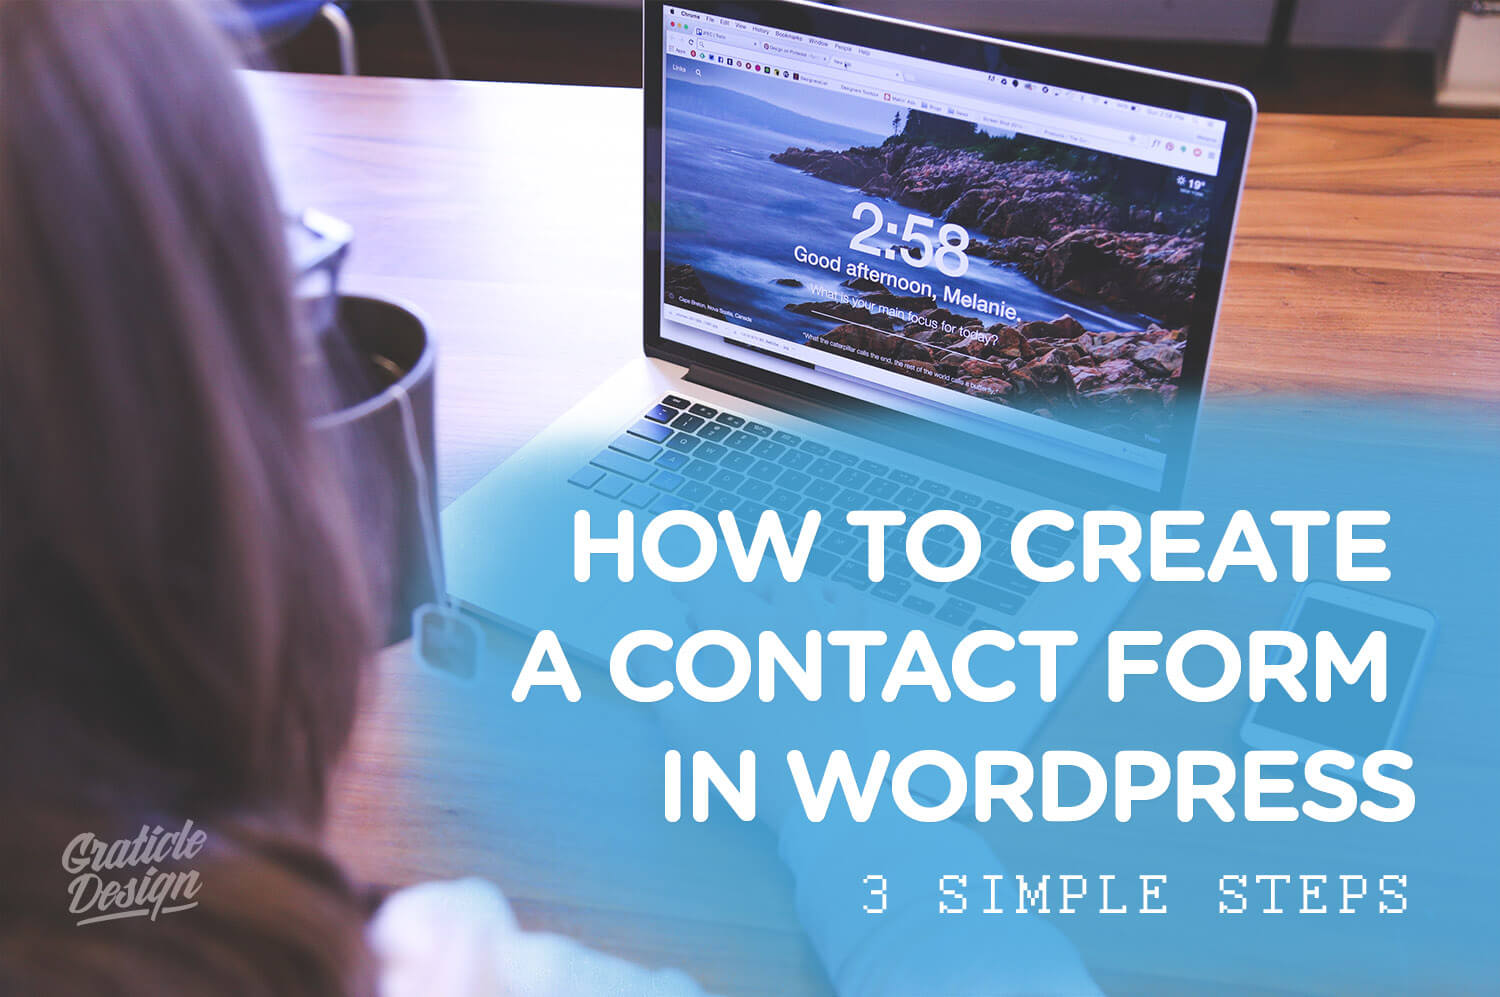 How to Eaily Create a Contact Form in WordPress in 3 Simple Steps